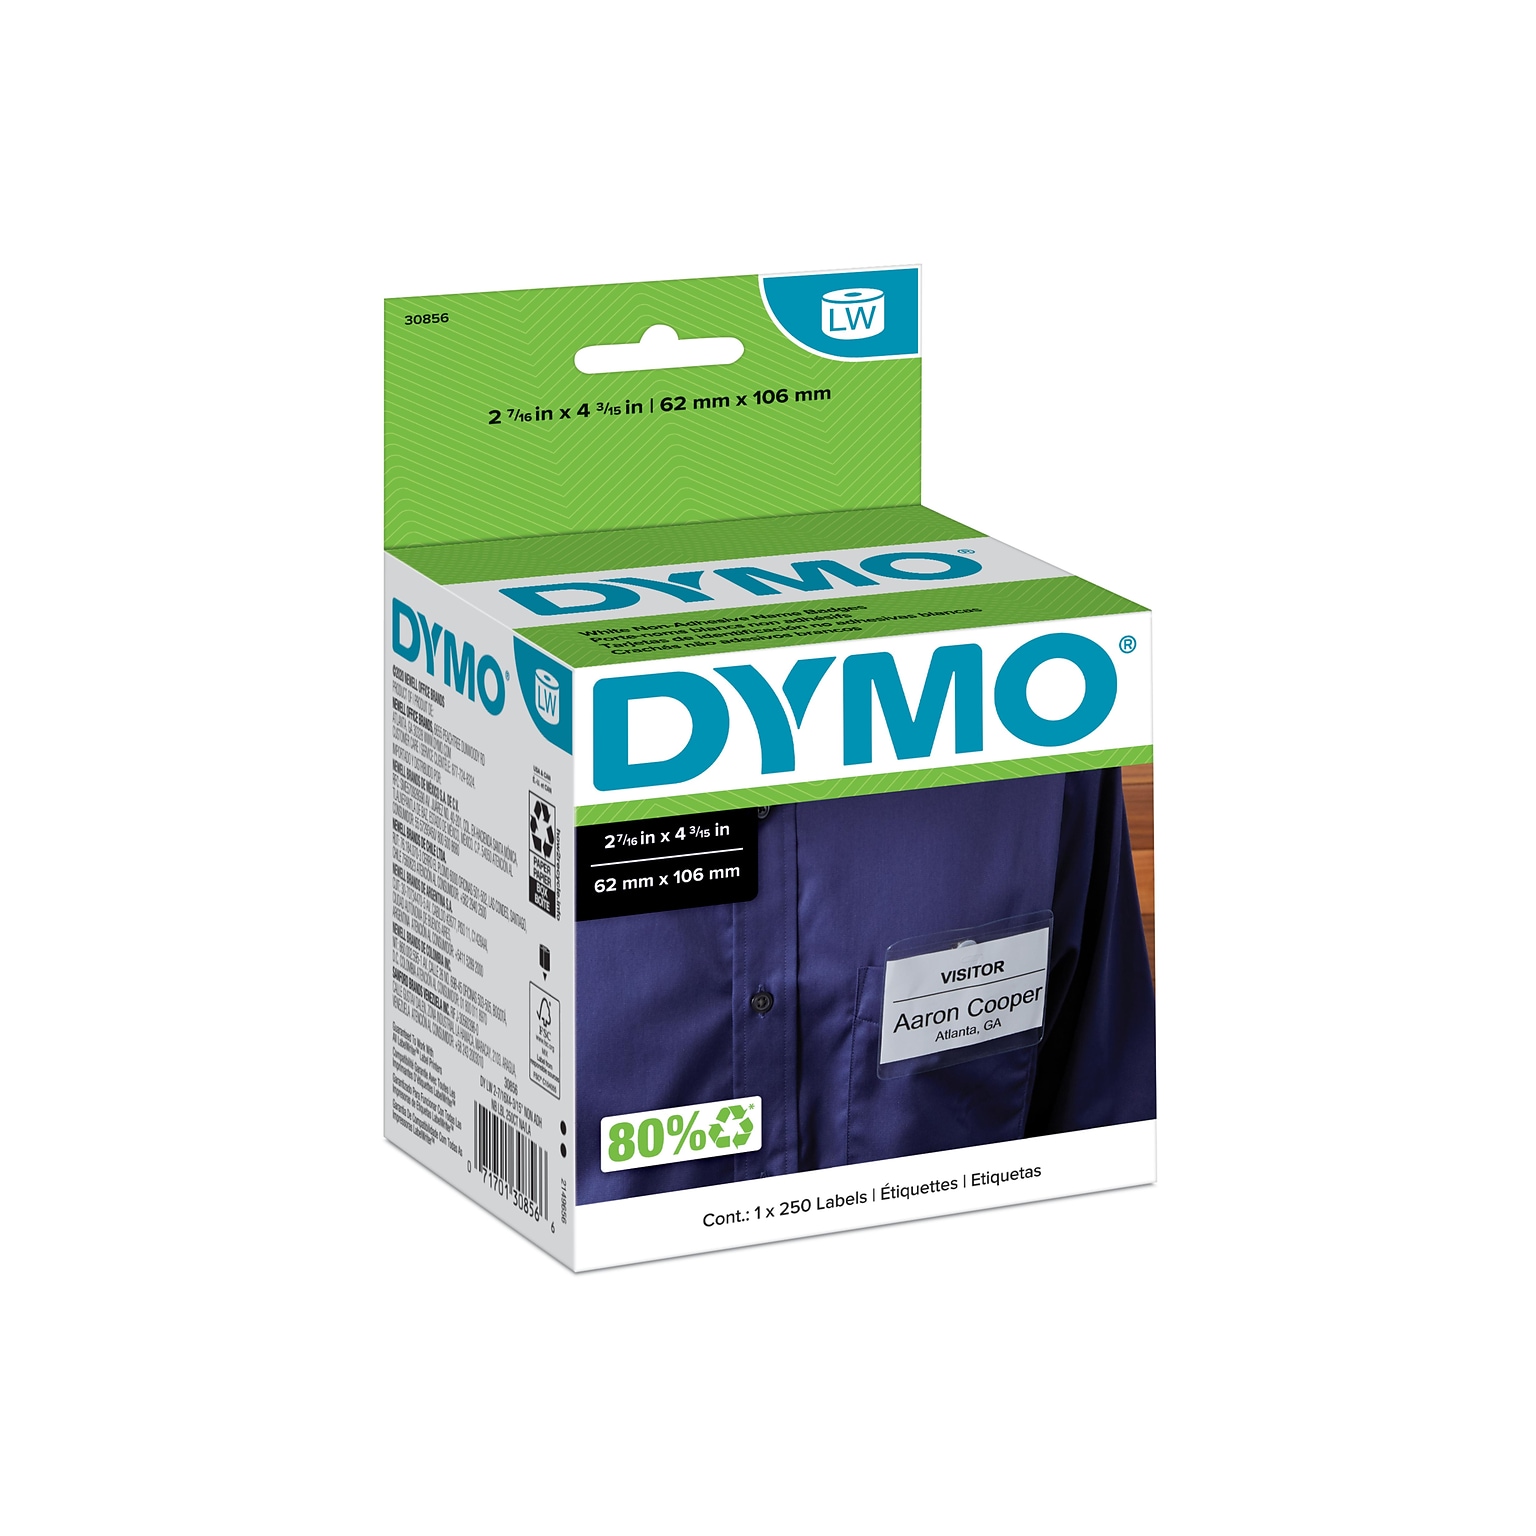 DYMO LabelWriter 30856 Non-Adhesive Name Badges, 4-3/15 x 2-7/16, Black on White, 250 Labels/Roll (30856)